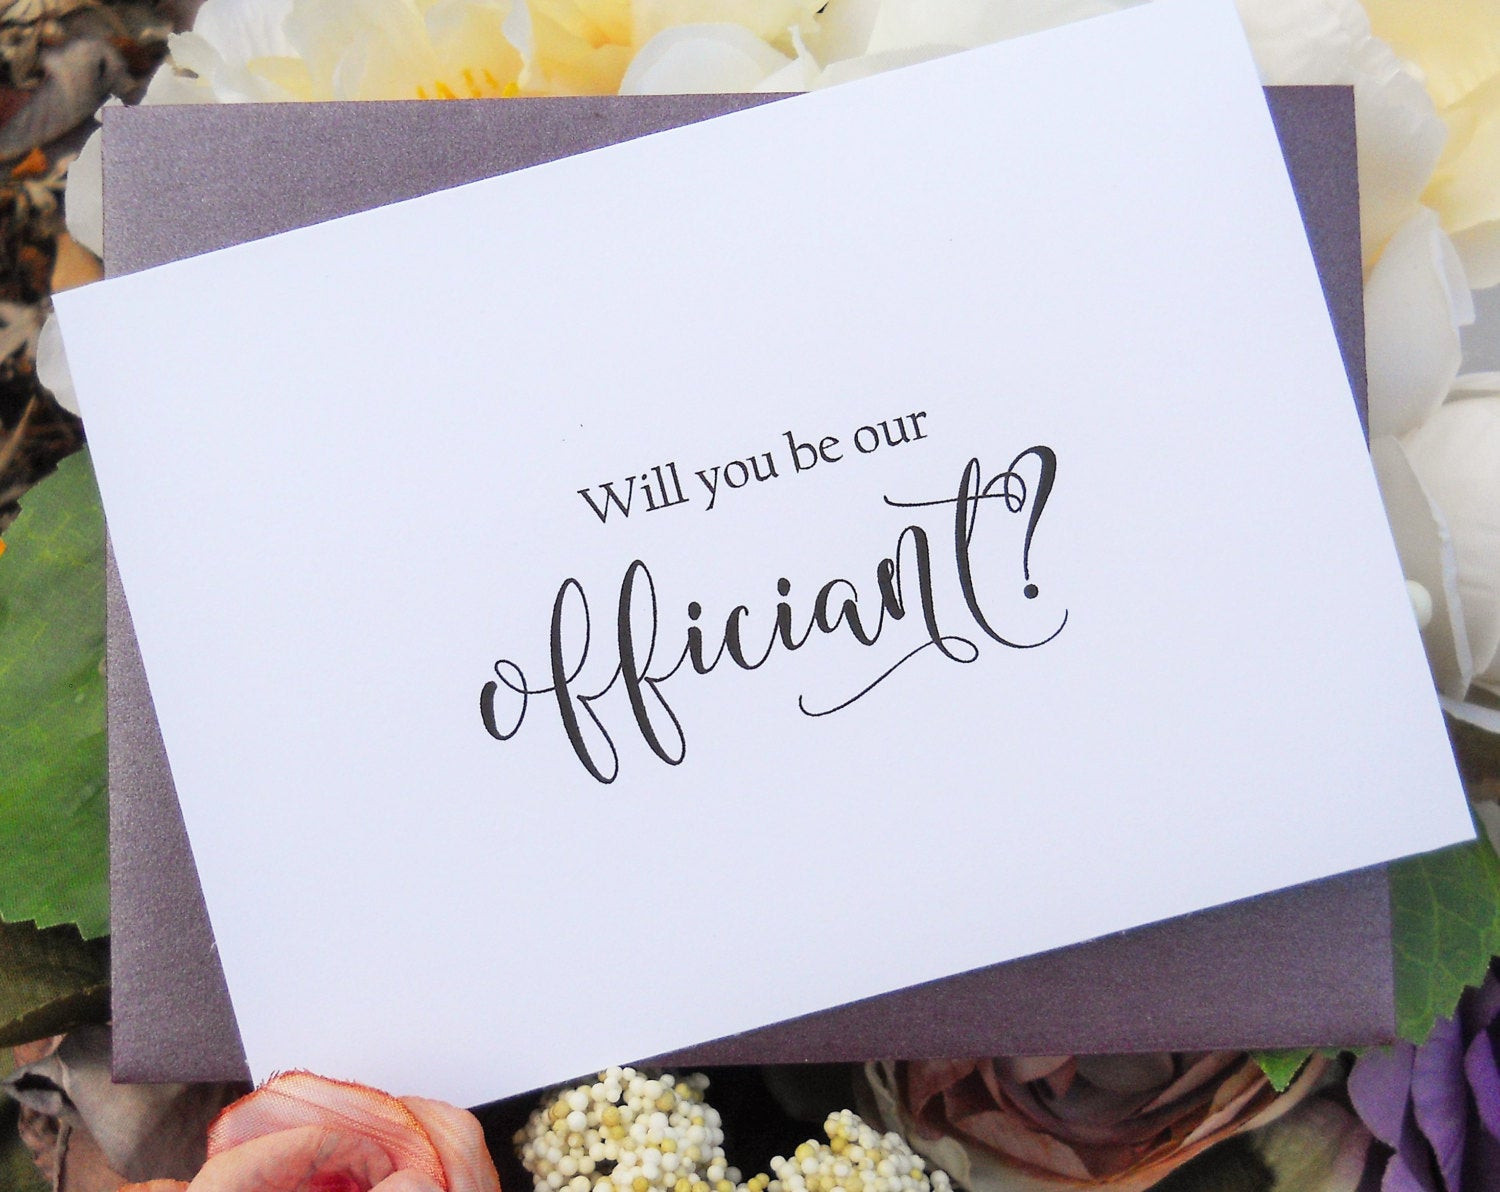 Wedding Officiant Gift Ideas
 WILL You Be Our OFFICIANT CARD ficiant Card Will You Be My